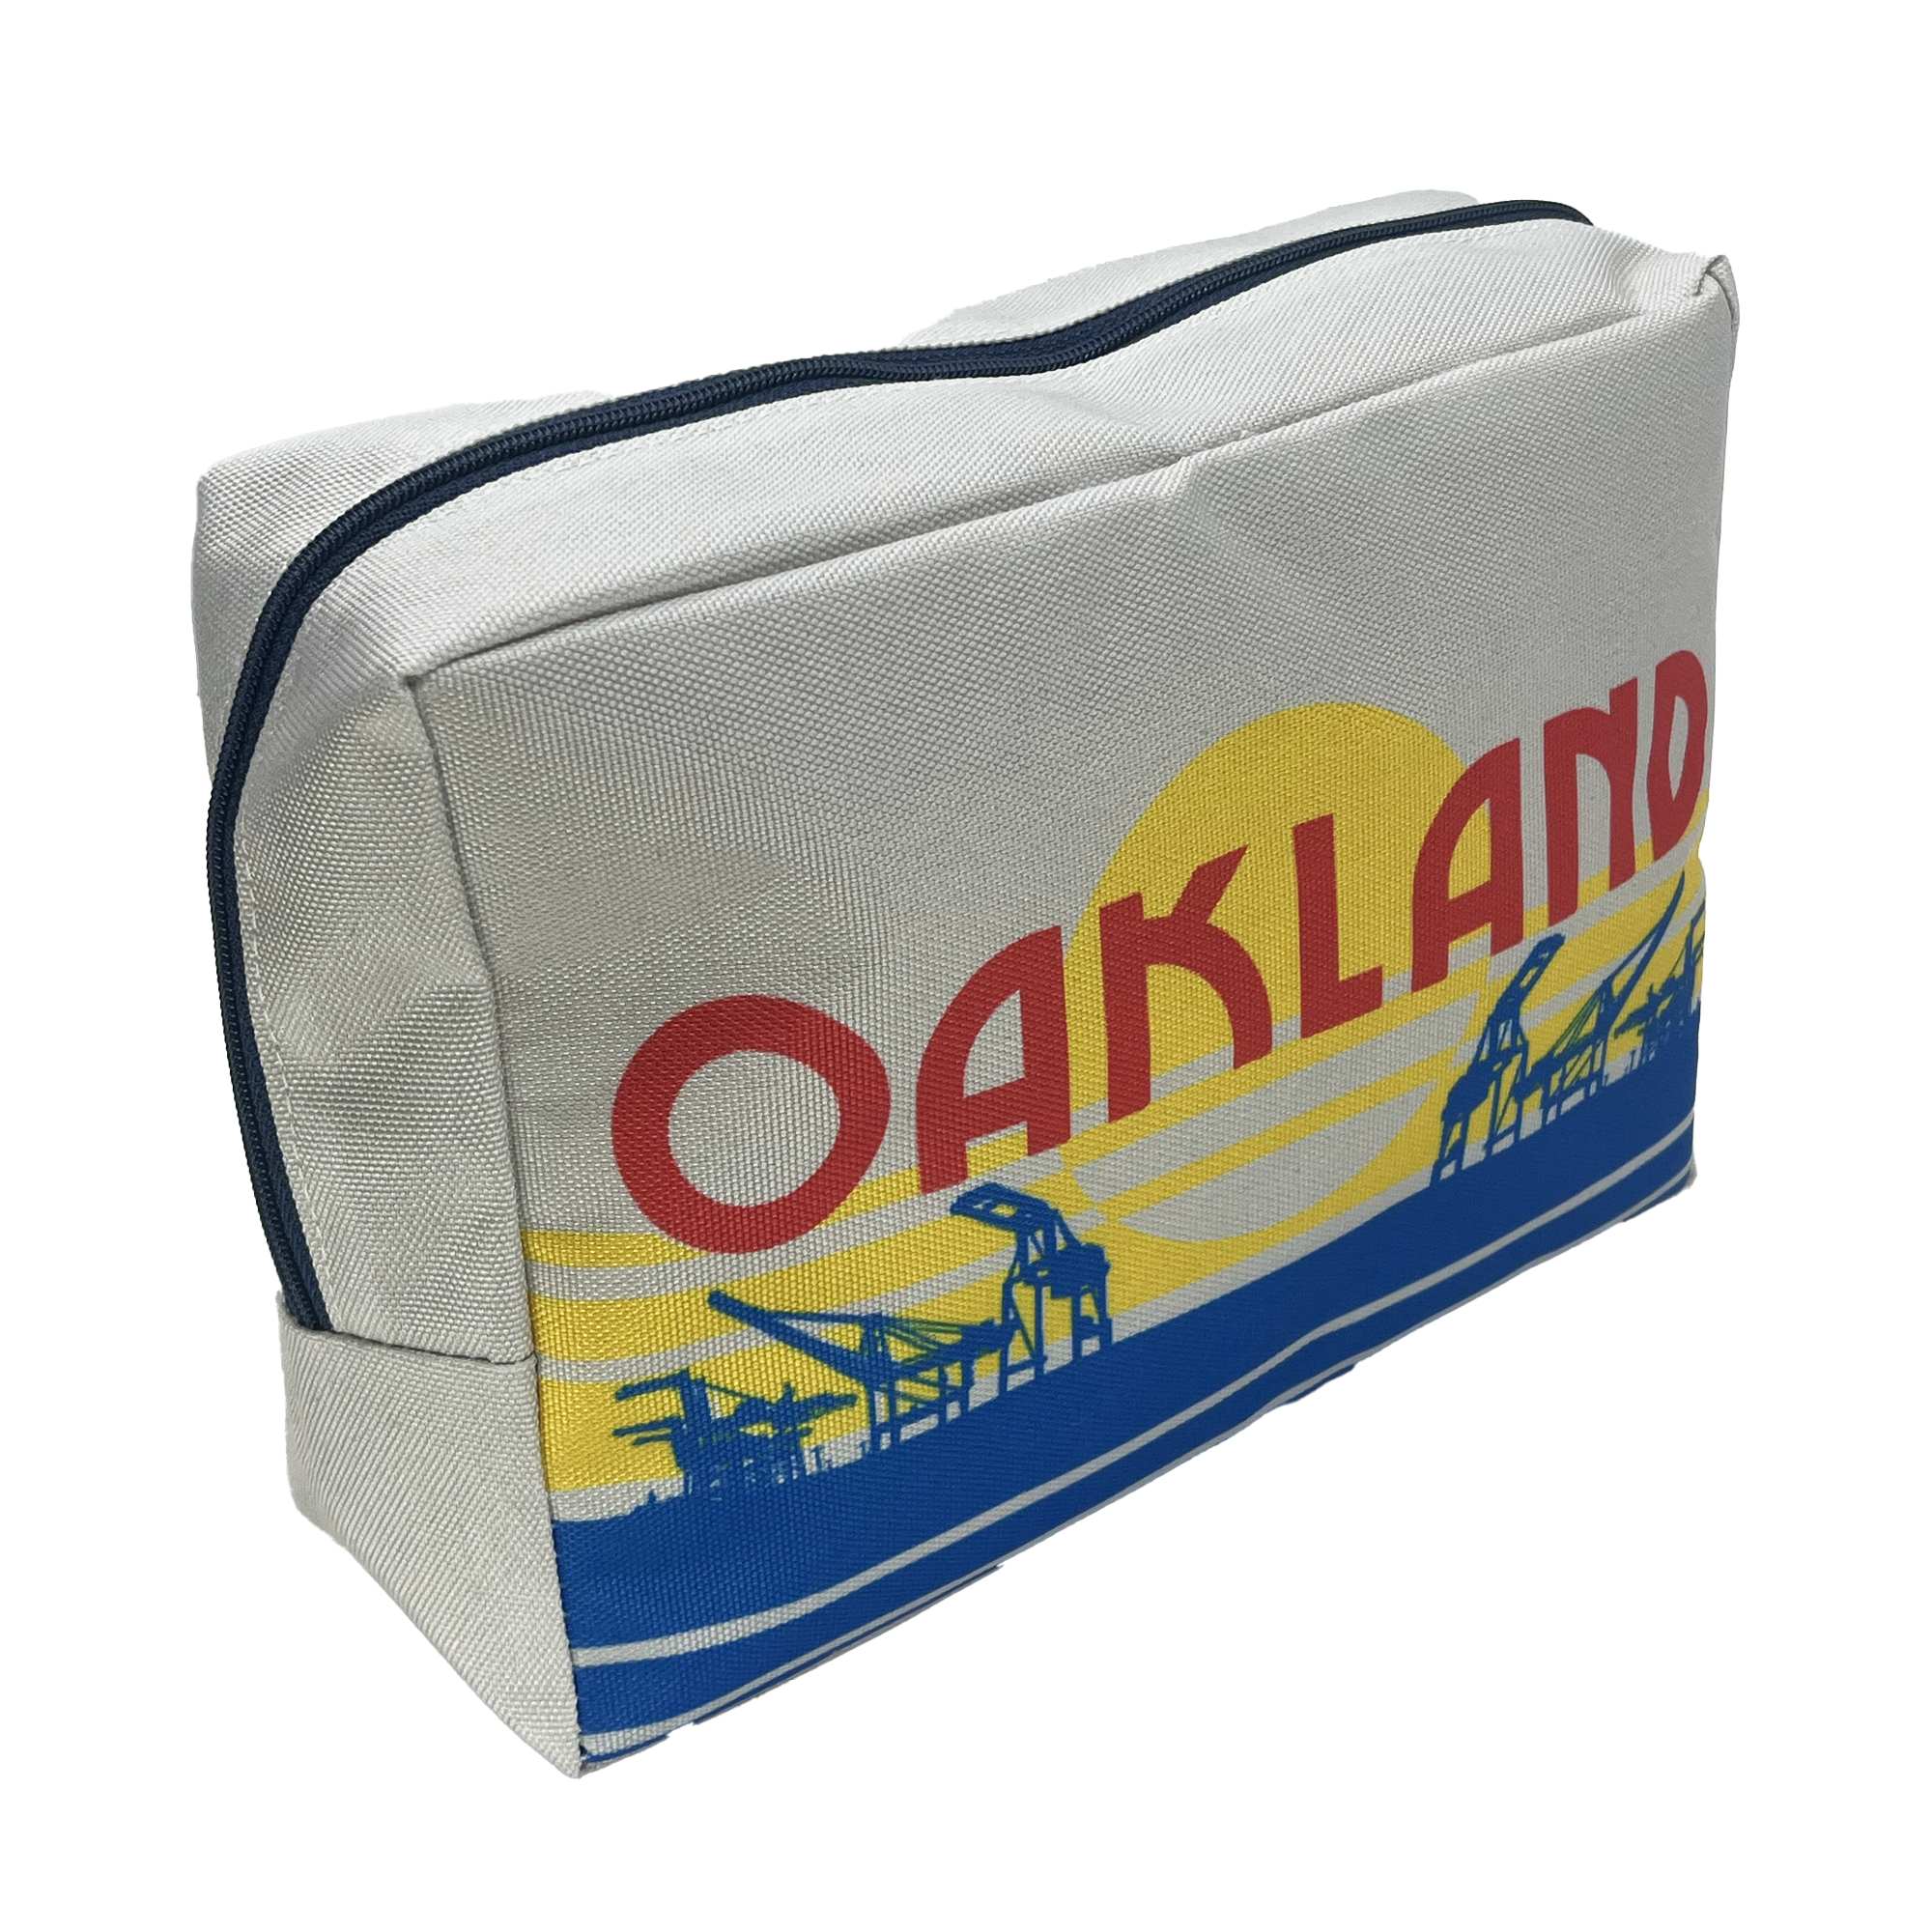 Angled view of a zippered polyester travel pouch with a red, blue, and yellow license plate design features an OAKLAND wordmark and graphic crane.